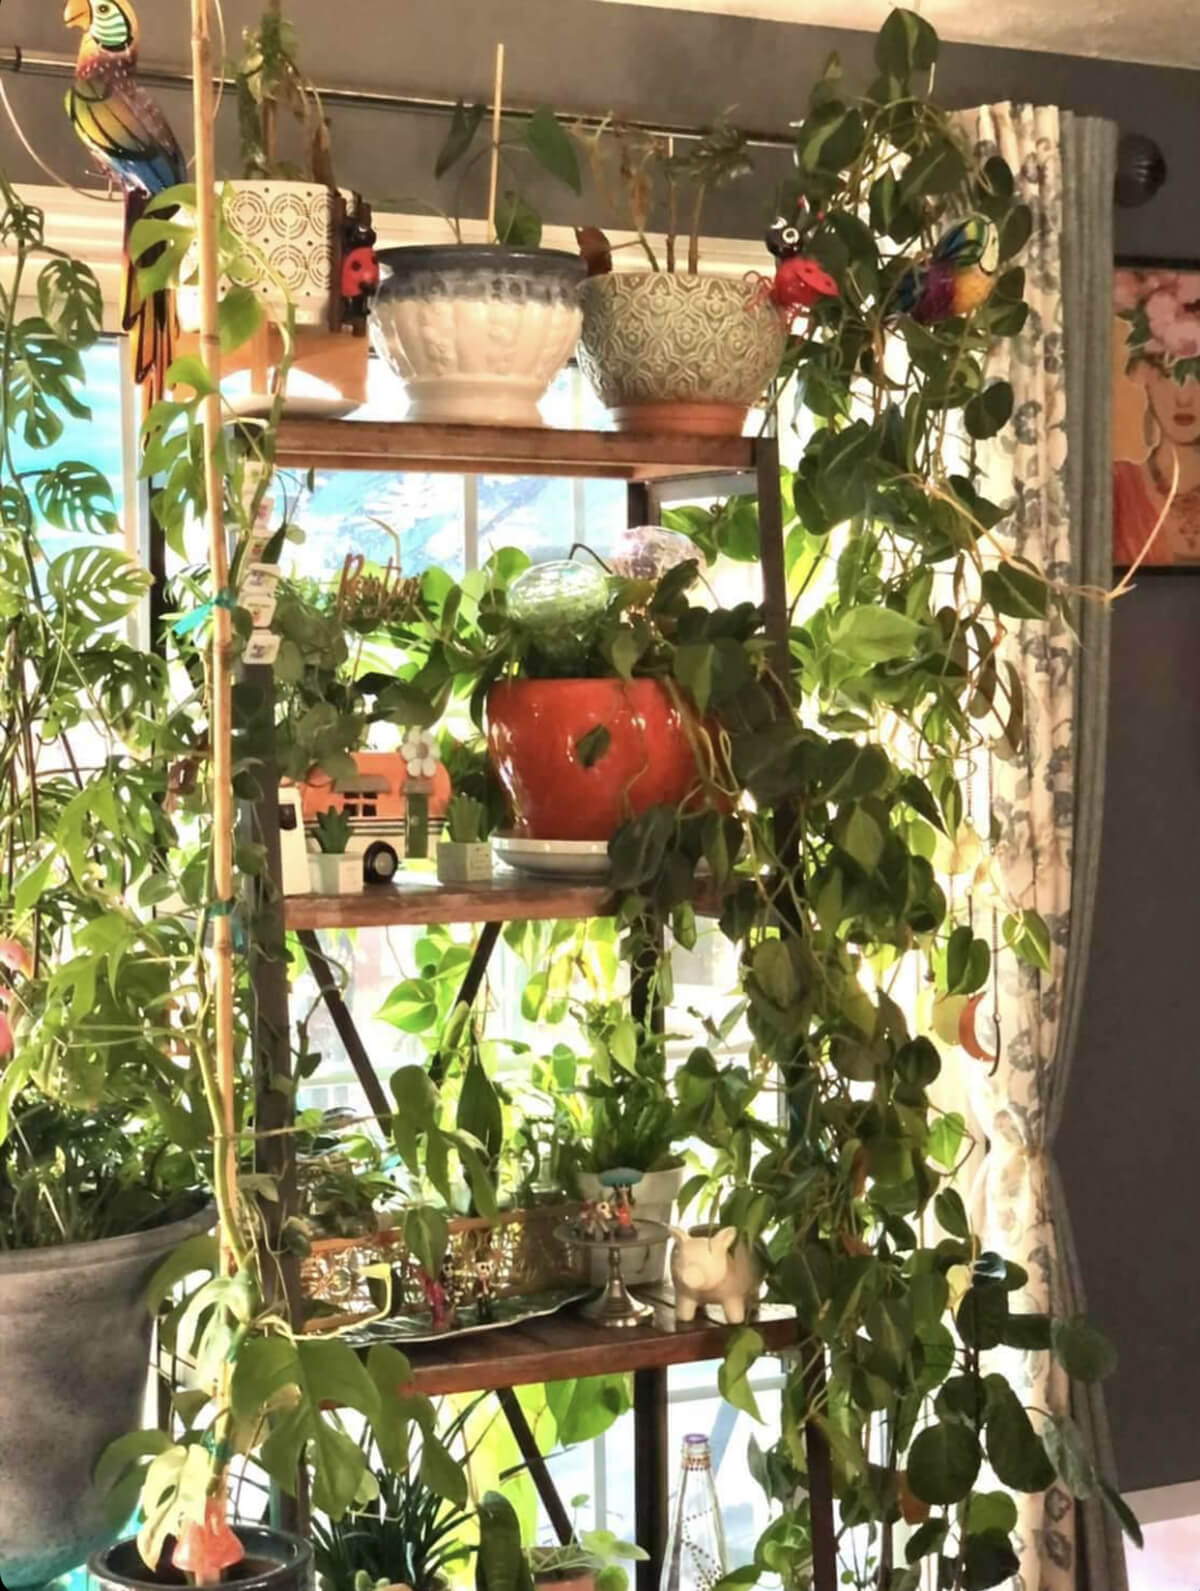 Aesthetic Plant Room - Many potted indoor plants on a ladder shelf in the dining room - Photo courtesy of @lachulachuleta on Instagram